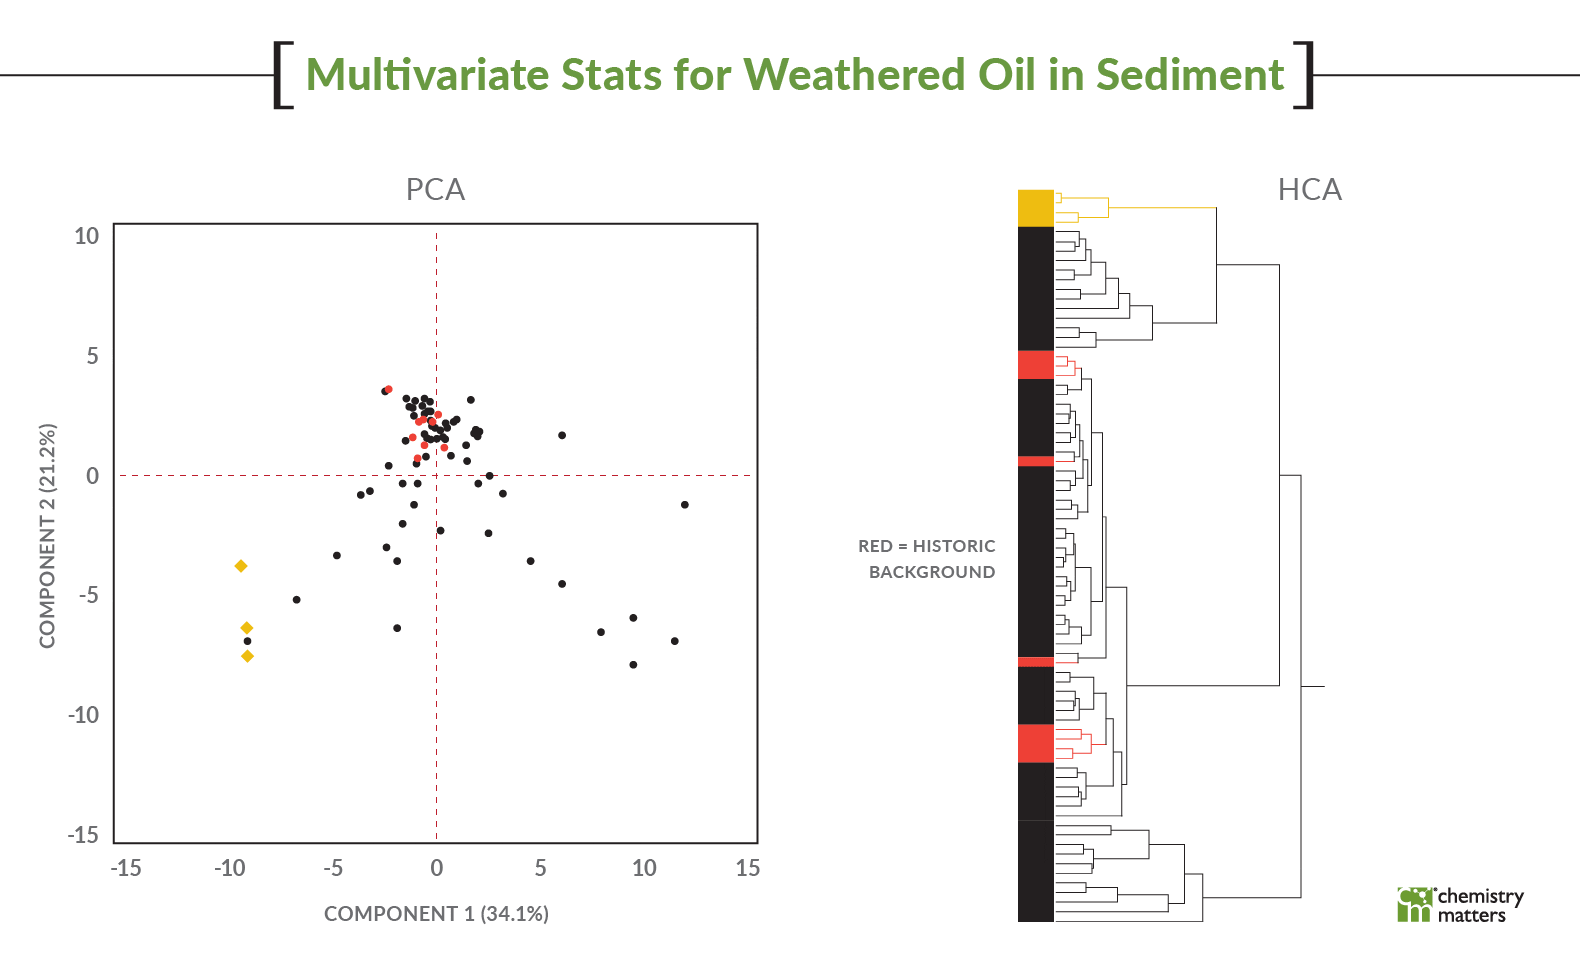 Mulivariate Stats for Weathered Oil in Sediment